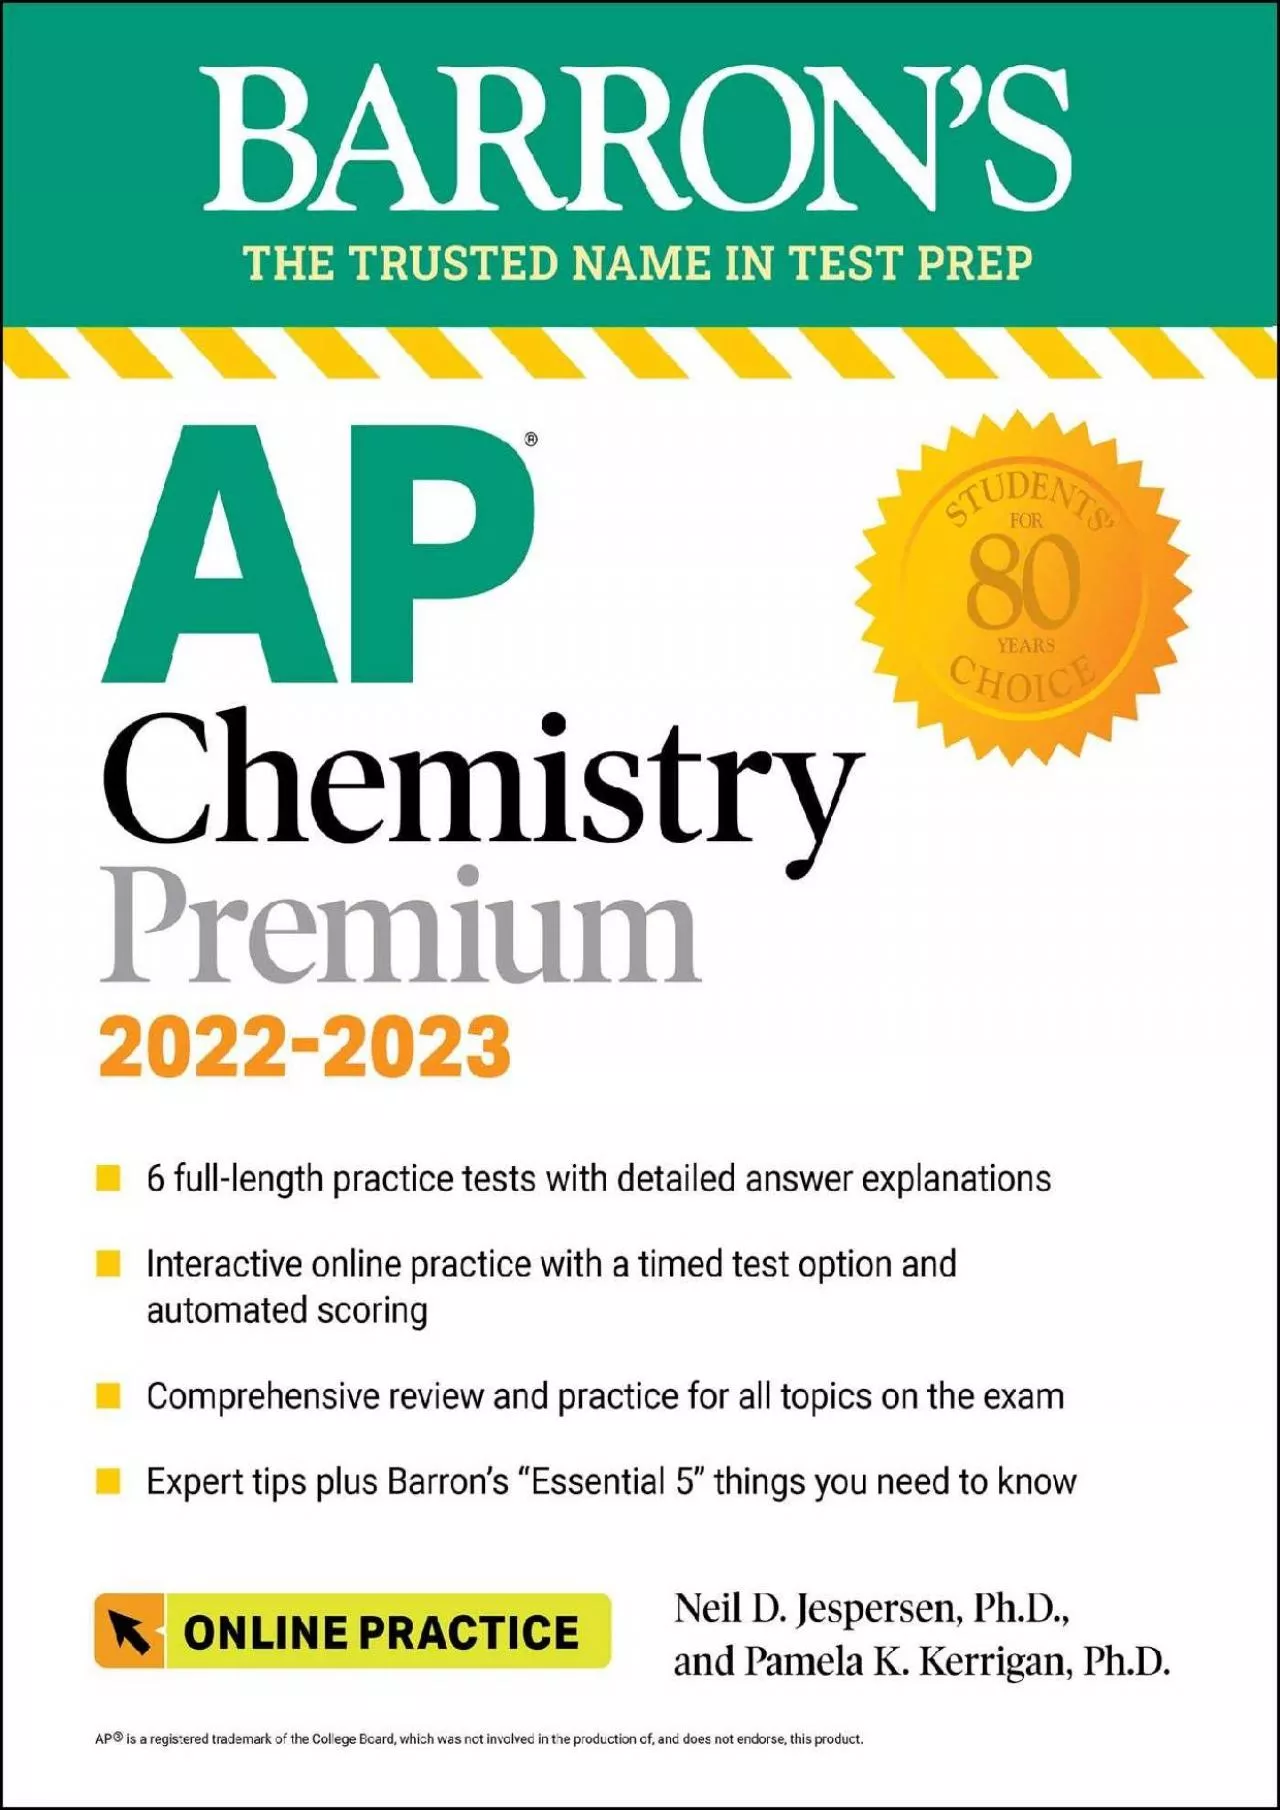 [READ] AP Chemistry Premium, 2022-2023: Comprehensive Review with 6 Practice Tests + an